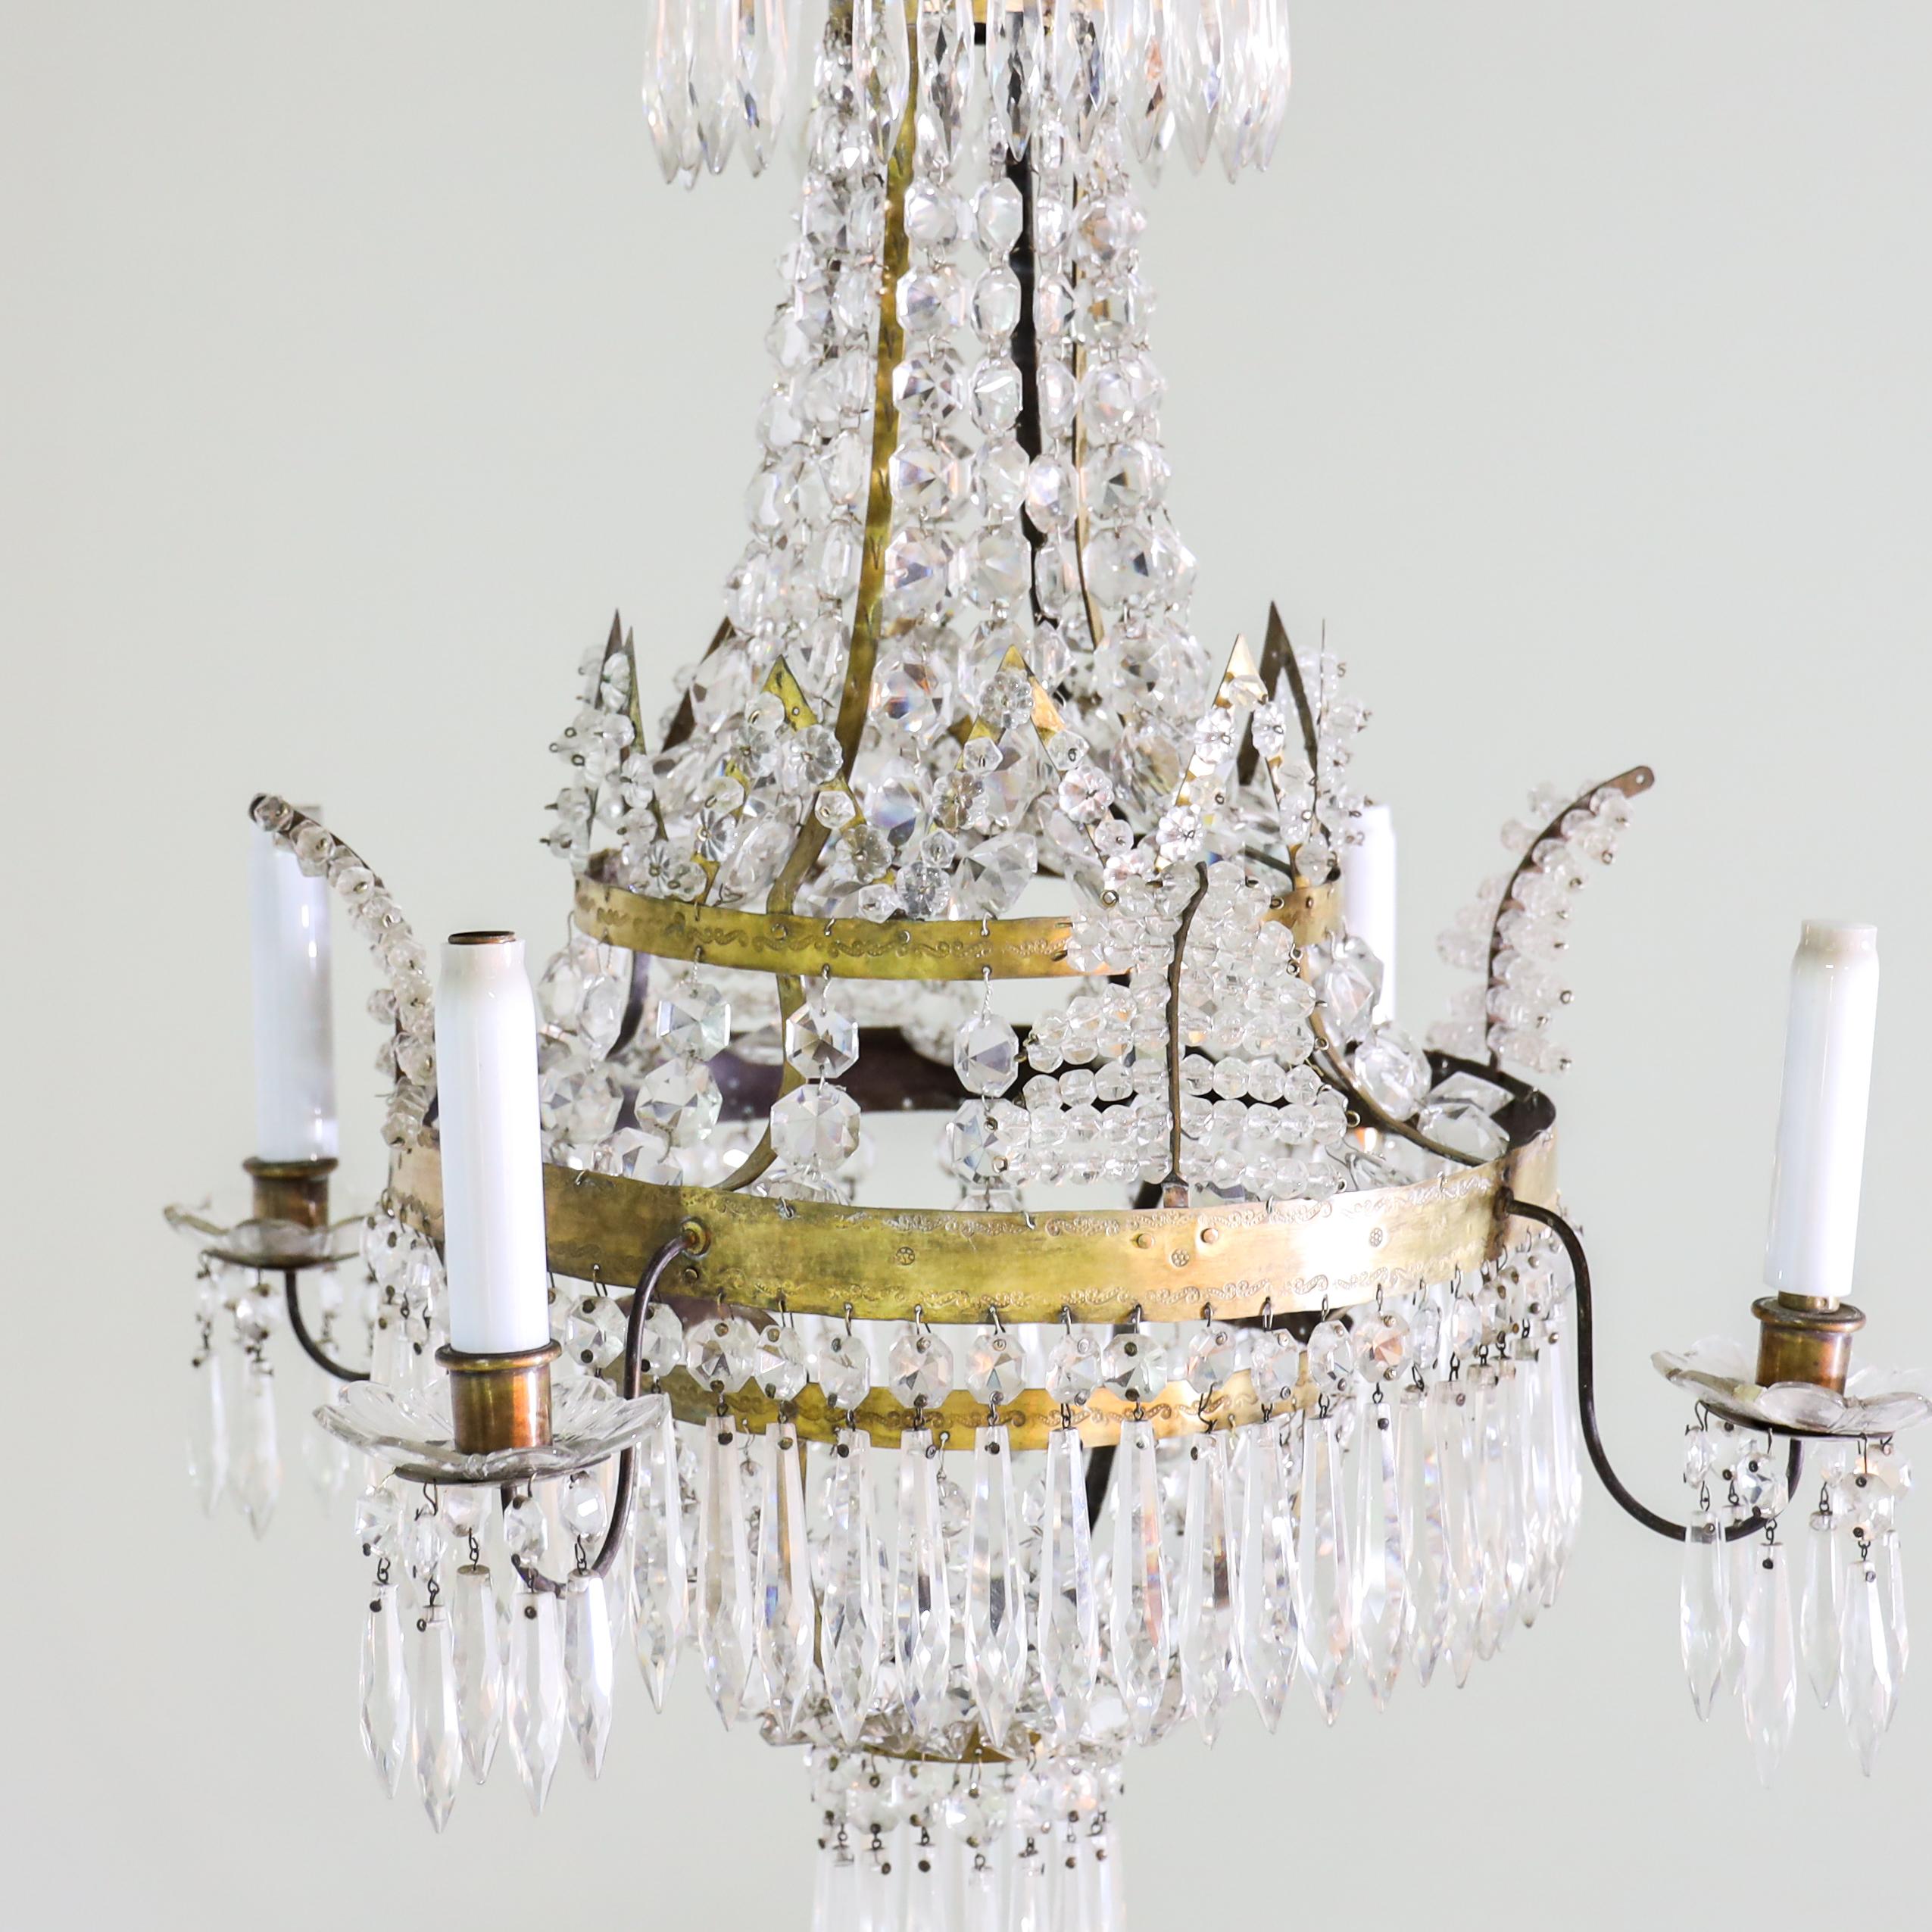 Four-light ceiling chandelier with crystal glass hangings and multi-level structure of brass hoops. The flower-shaped drip bowls are also made of glass and hung with glass prisms.